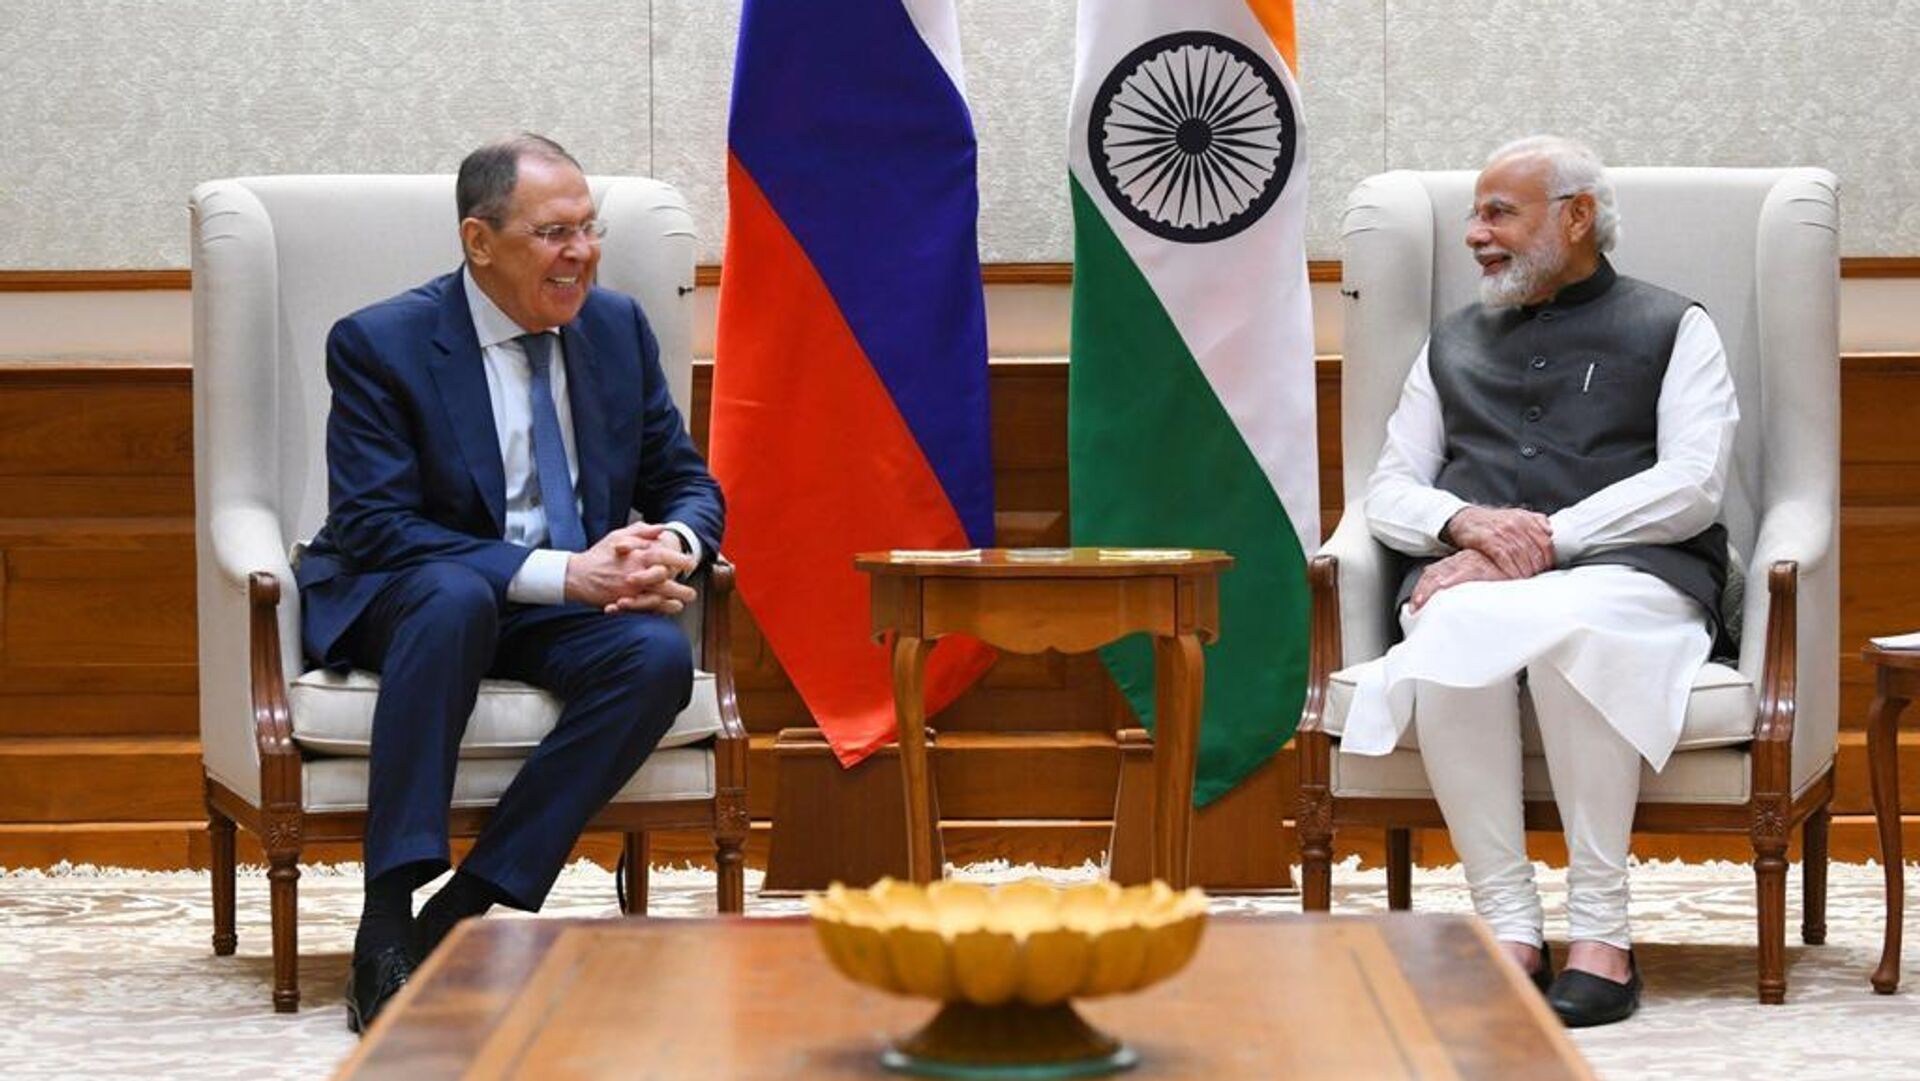 Russian Foreign Minister Sergei Lavrov was received by Prime Minister Narendra Modi during his official visit to India - Sputnik International, 1920, 01.04.2022